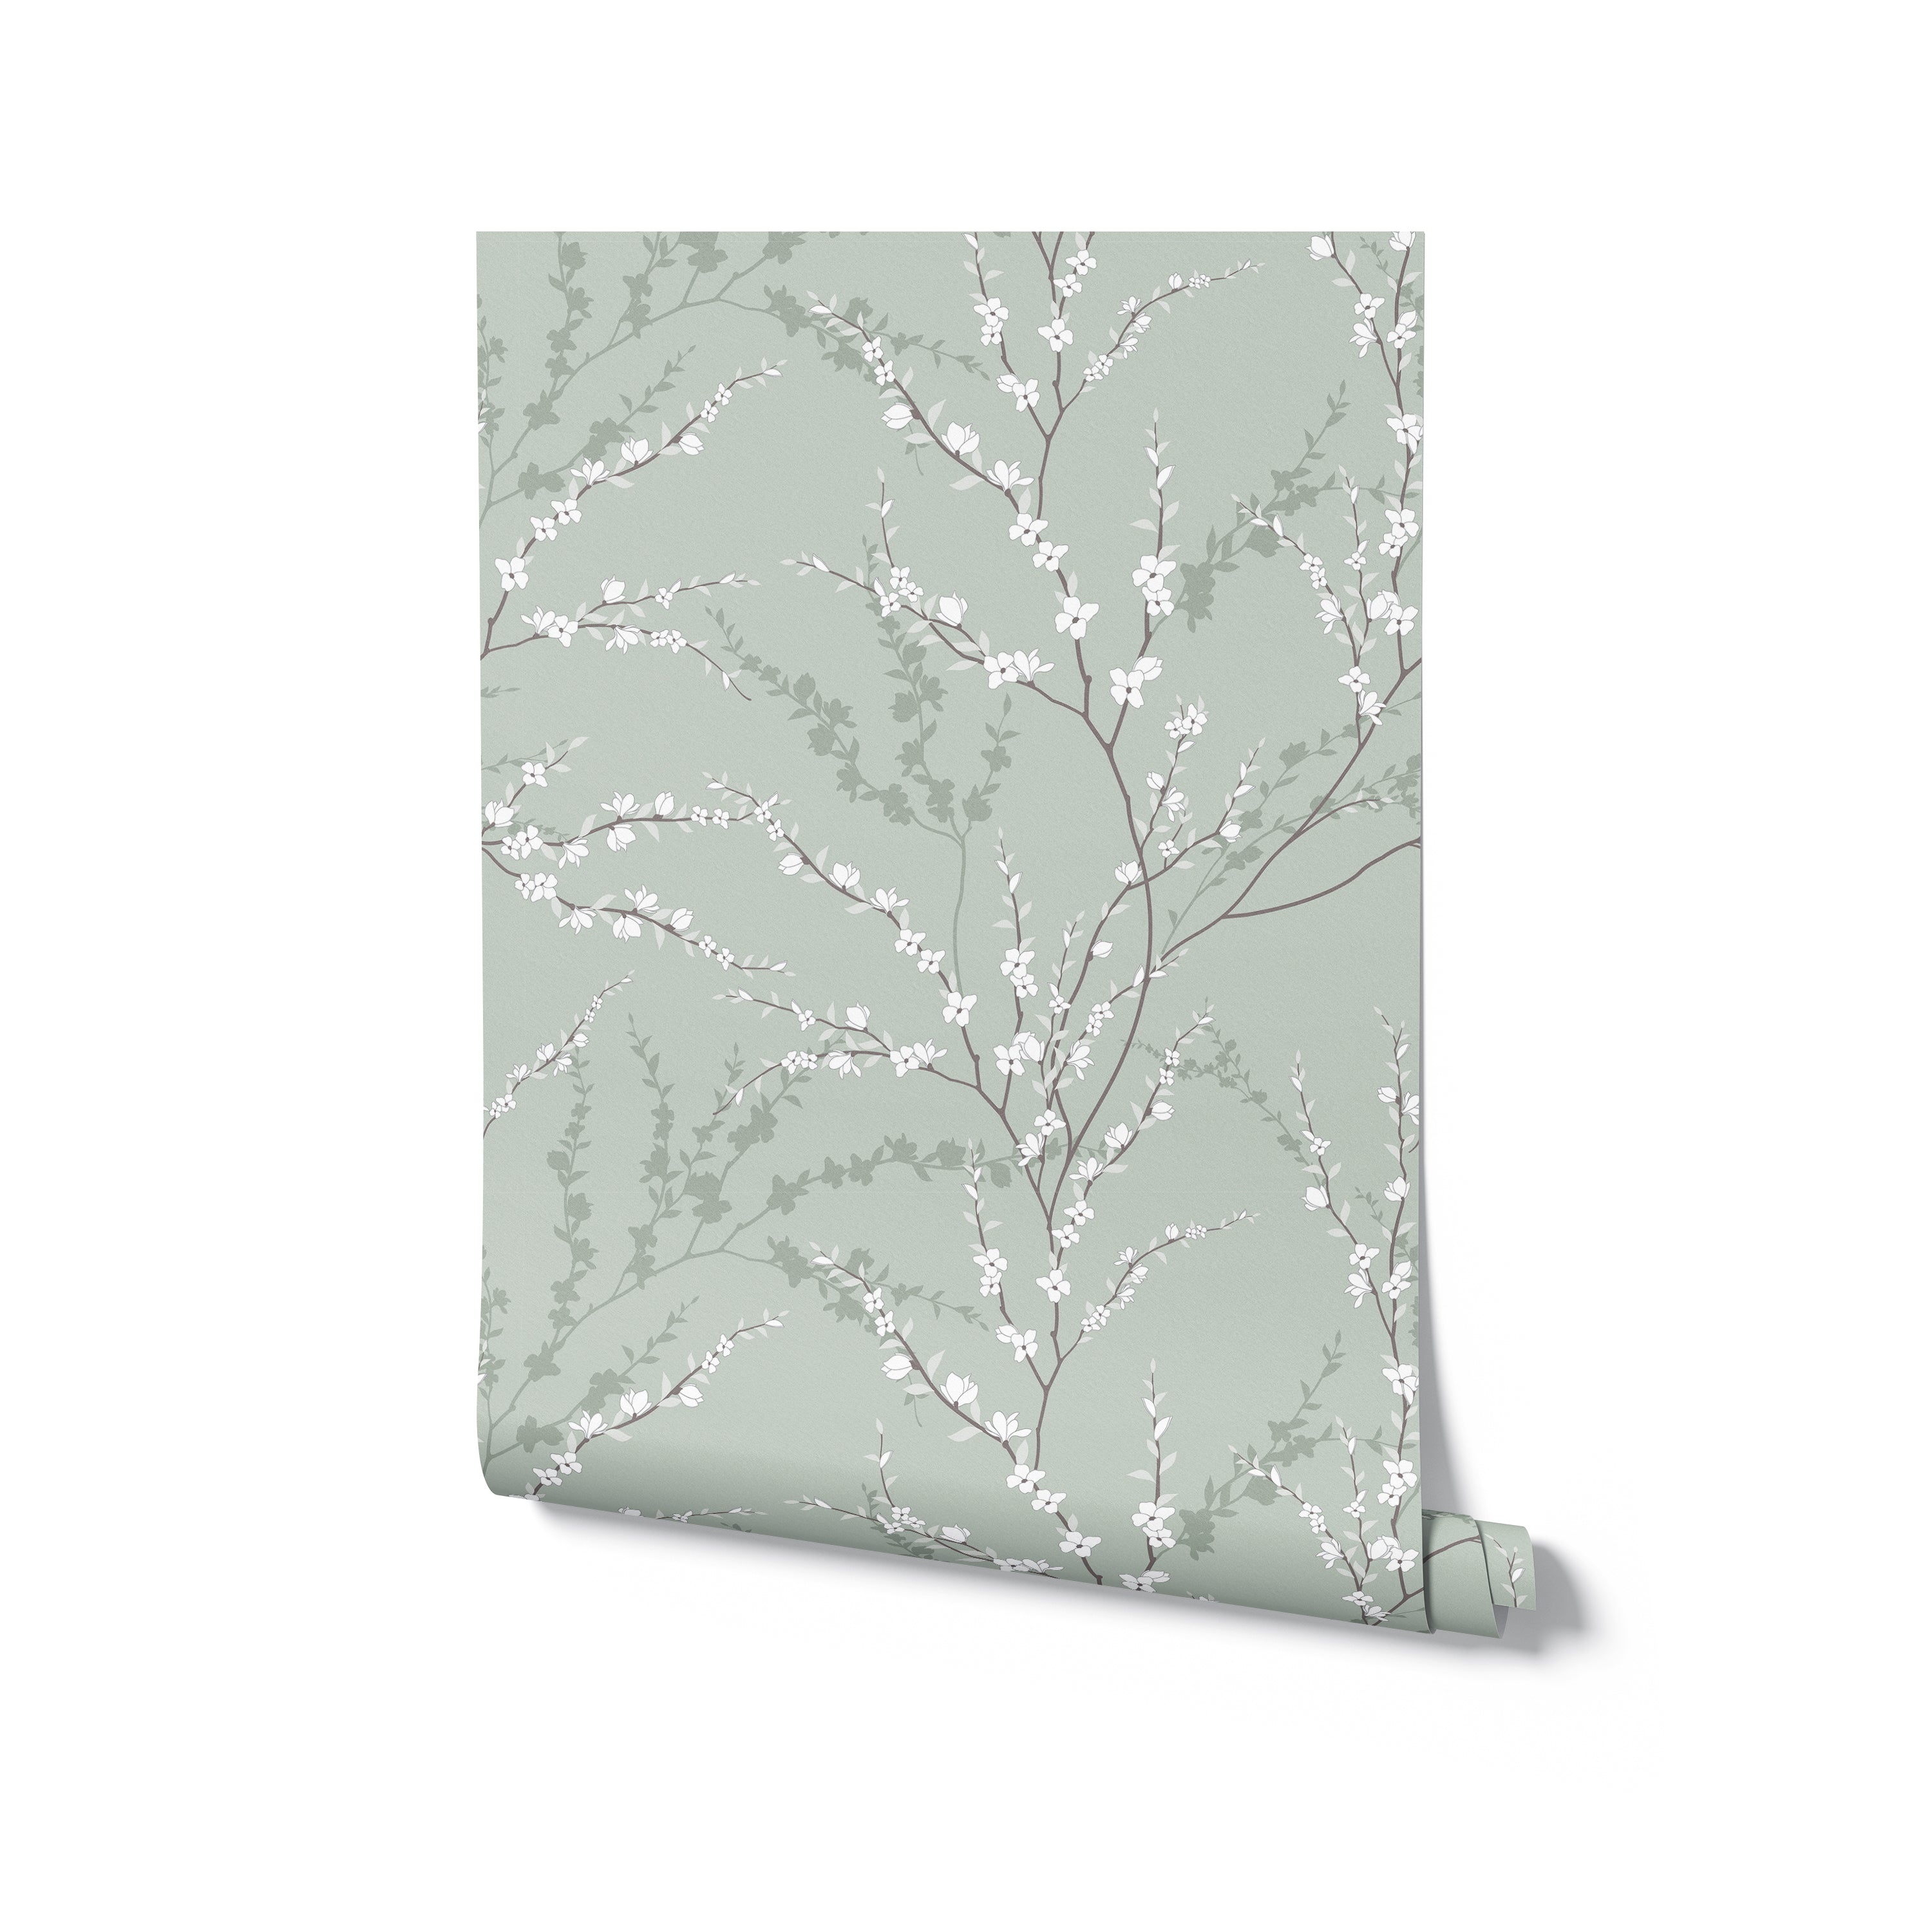 A roll of the Enchanted Blossoms Wallpaper partially unfurled, revealing the wallpaper's full pattern of graceful white flowers and leaves set against a gentle green, ready to transform any space with its enchanting design.